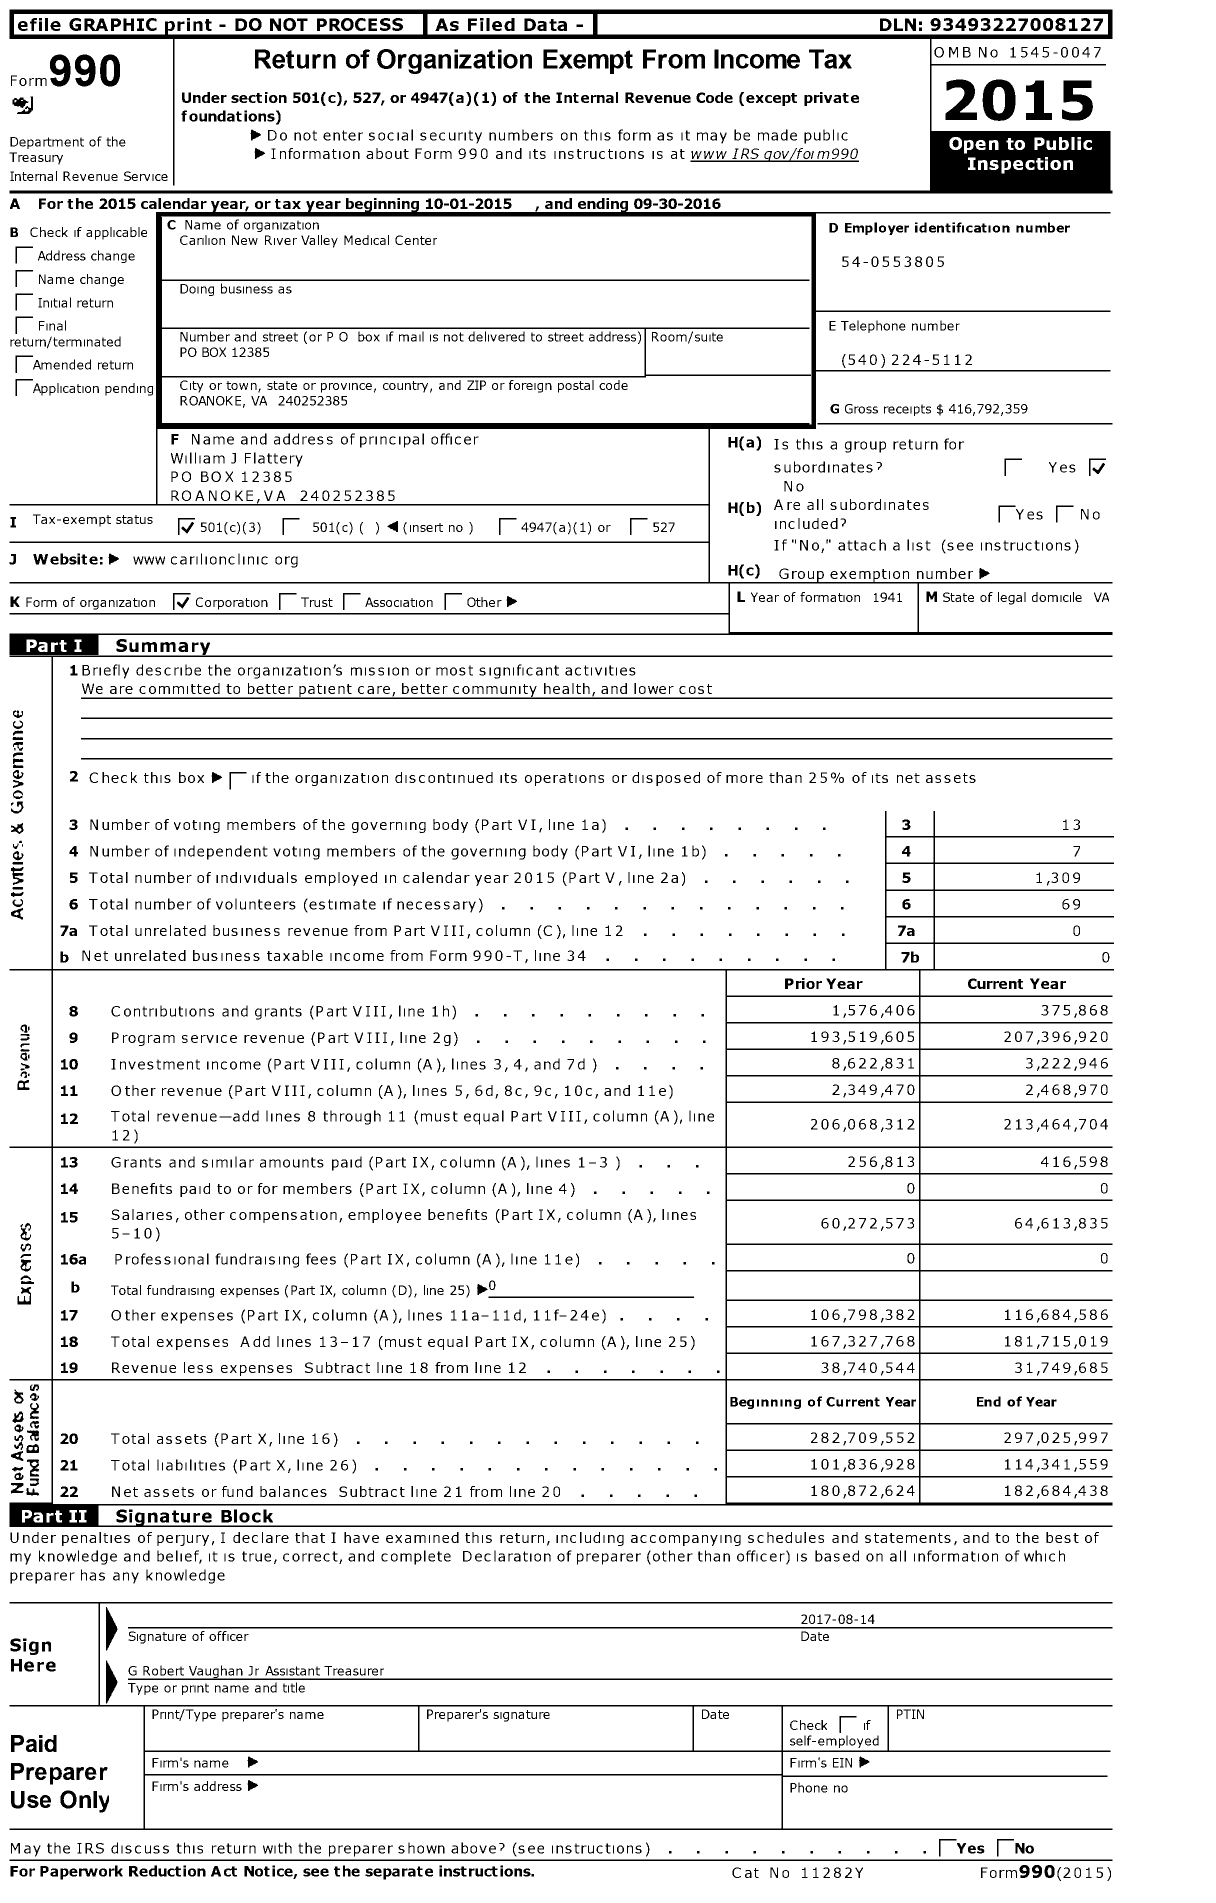 Image of first page of 2015 Form 990 for Carilion New River Valley Medical Center (CNRV)